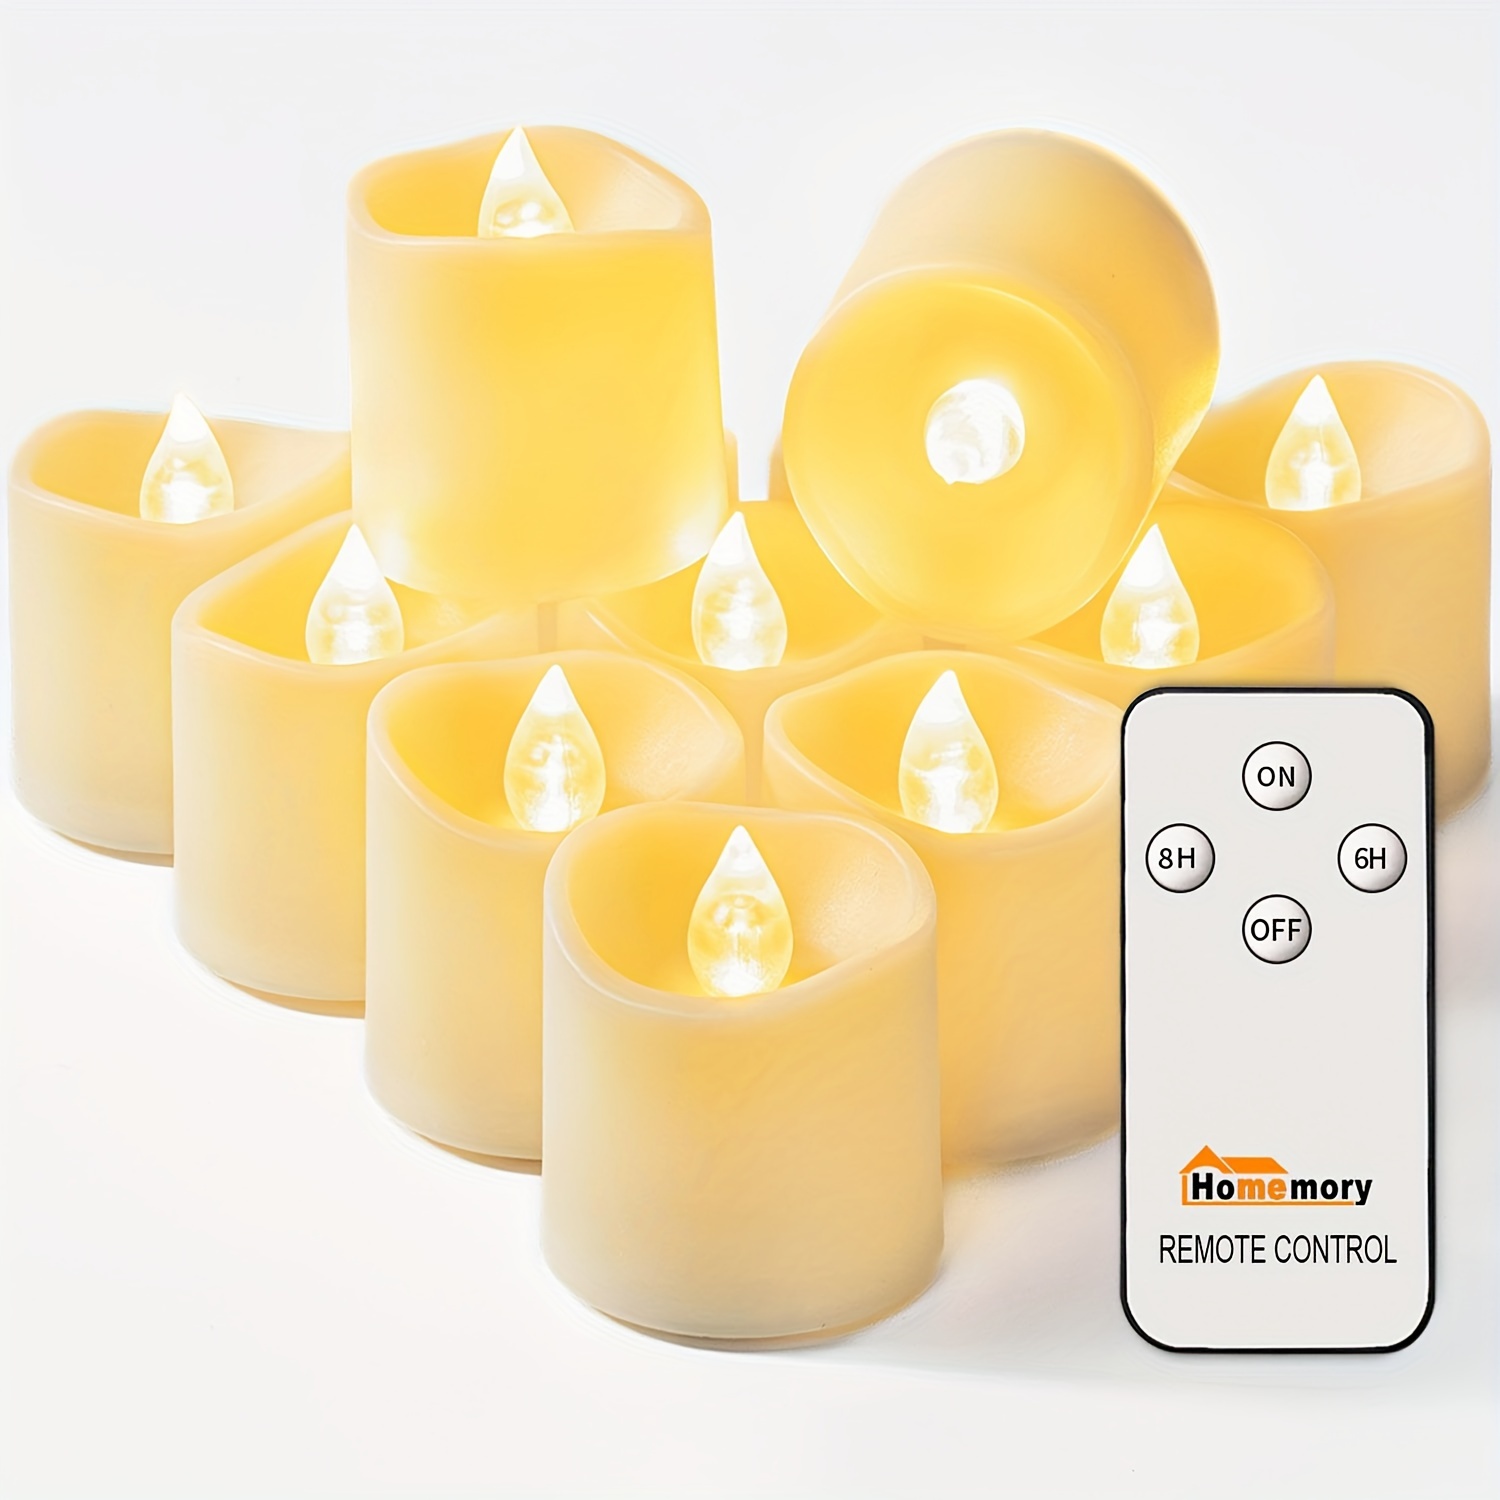 

24pcs Timer Remote Control Flameless Led Votive Candles, 1.5" X 1.6" Battery Operated Tea Light, Electric Fake Candles In Warm White For Wedding, Festival Celebration Decor (ivory Base)